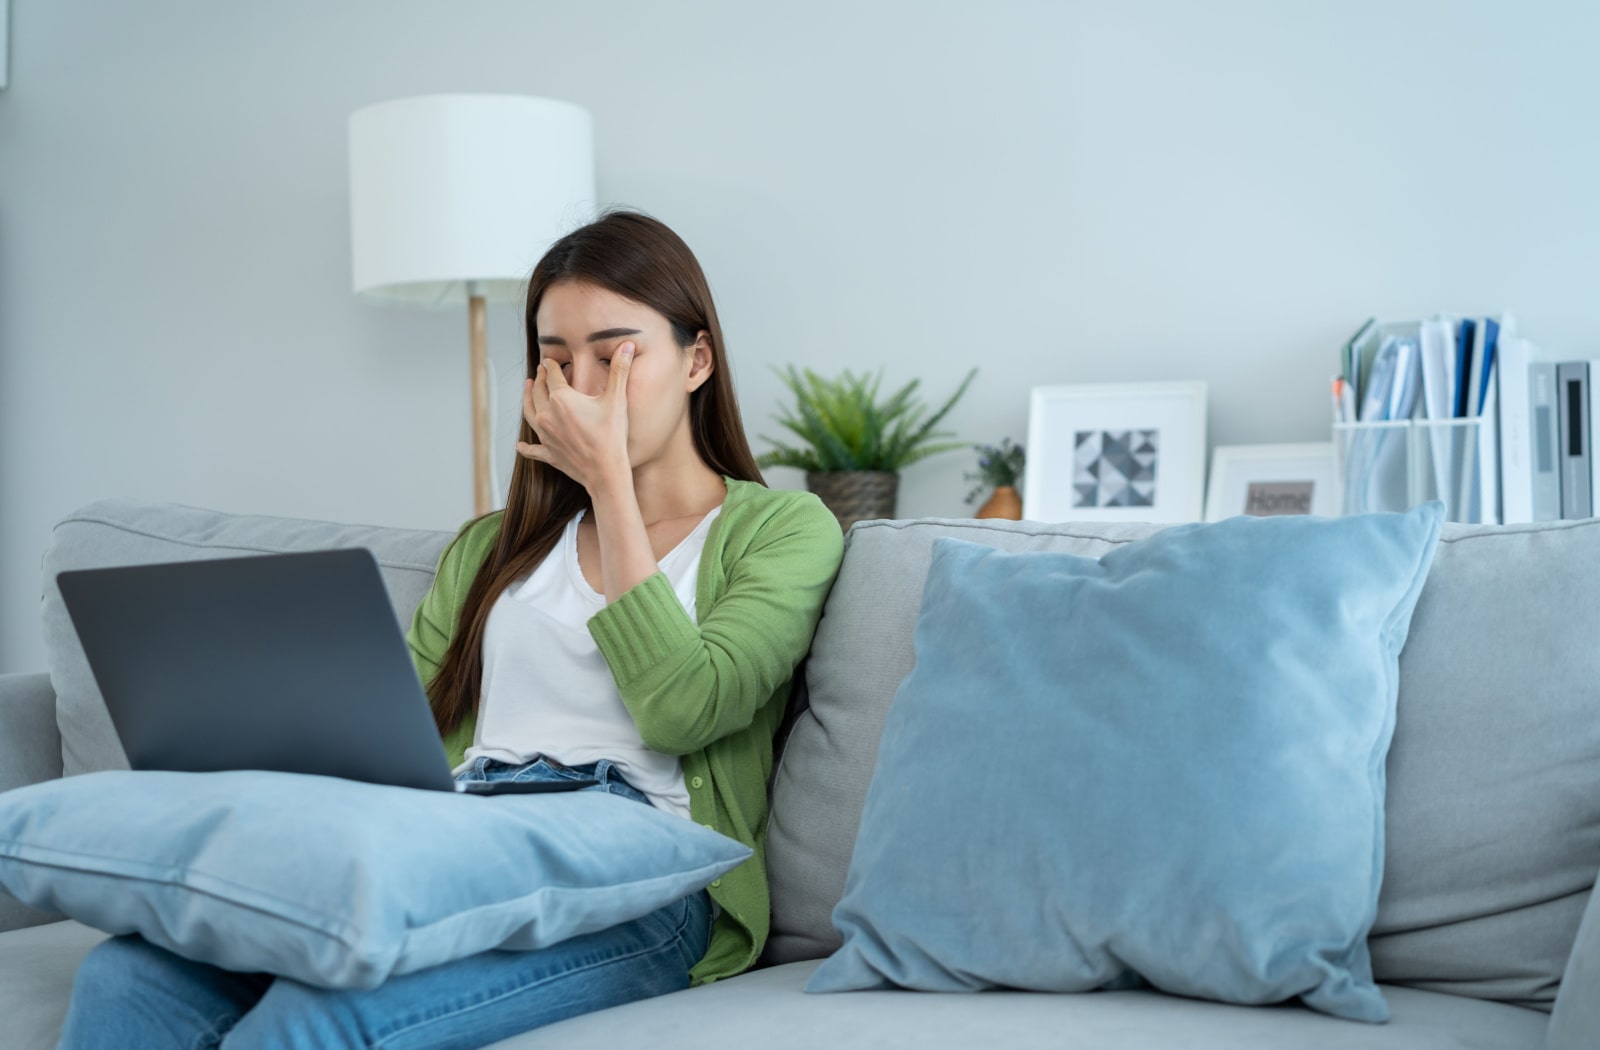 A woman sitting on a couch with a laptop sitting on her lap. She's rubbing her eyes due to eye strain